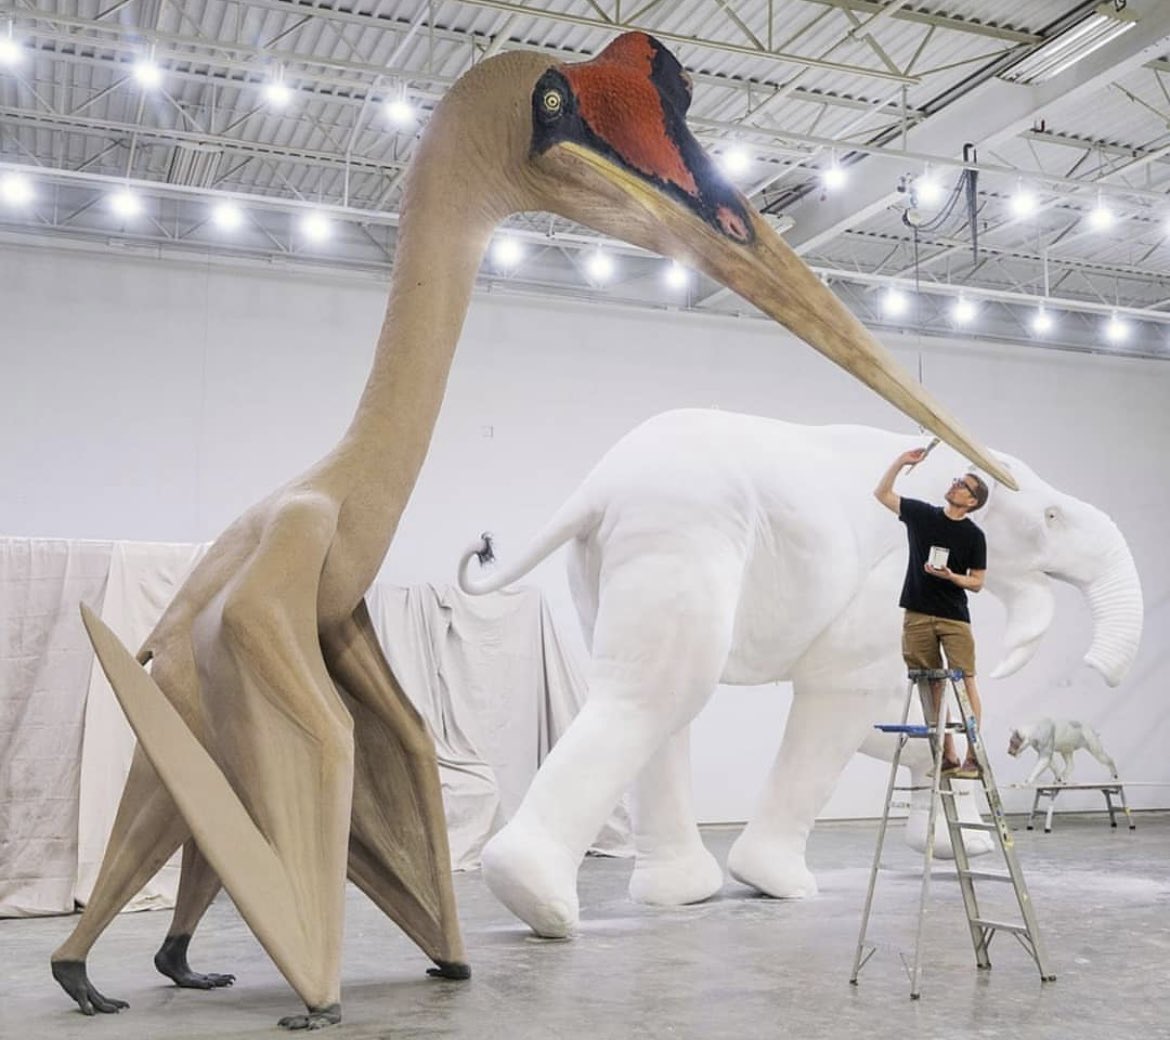 Quetzalcoatlus northropi is a Late Cretaceous pterosaur, which lived approximately 100.5 to 66 million years ago in North America. It is one of the largest flying animals in history, with a wingspan that could reach up to 52 feet (15.9 meters) and a size comparable to a giraffe.